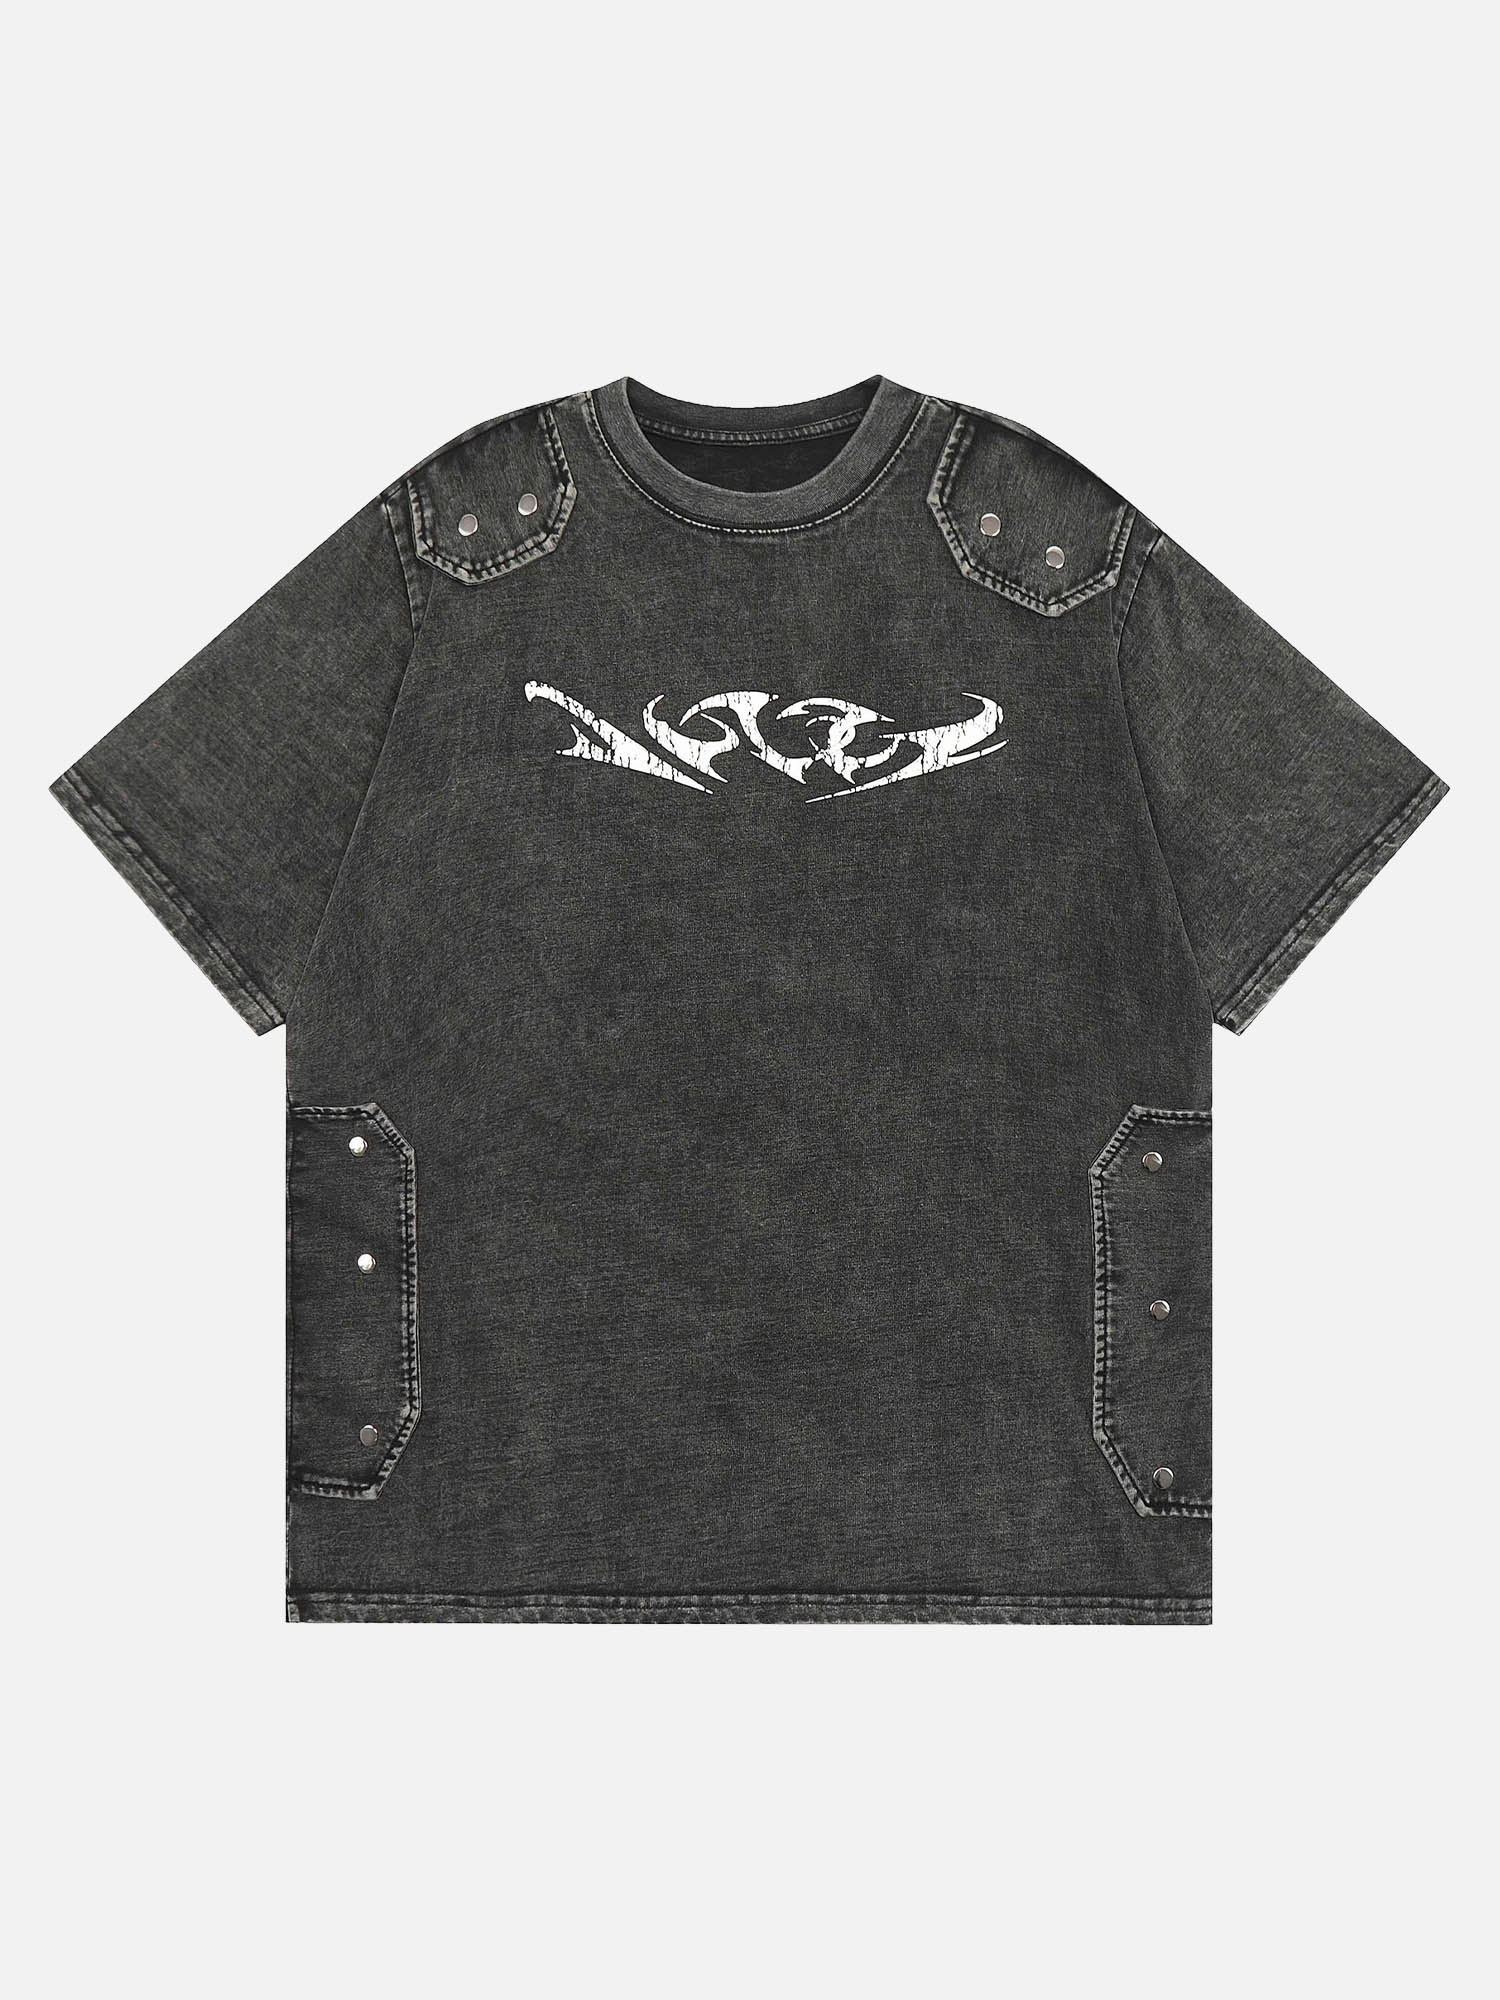 High Street Washed Distressed Sickle Print Patch T-shirt